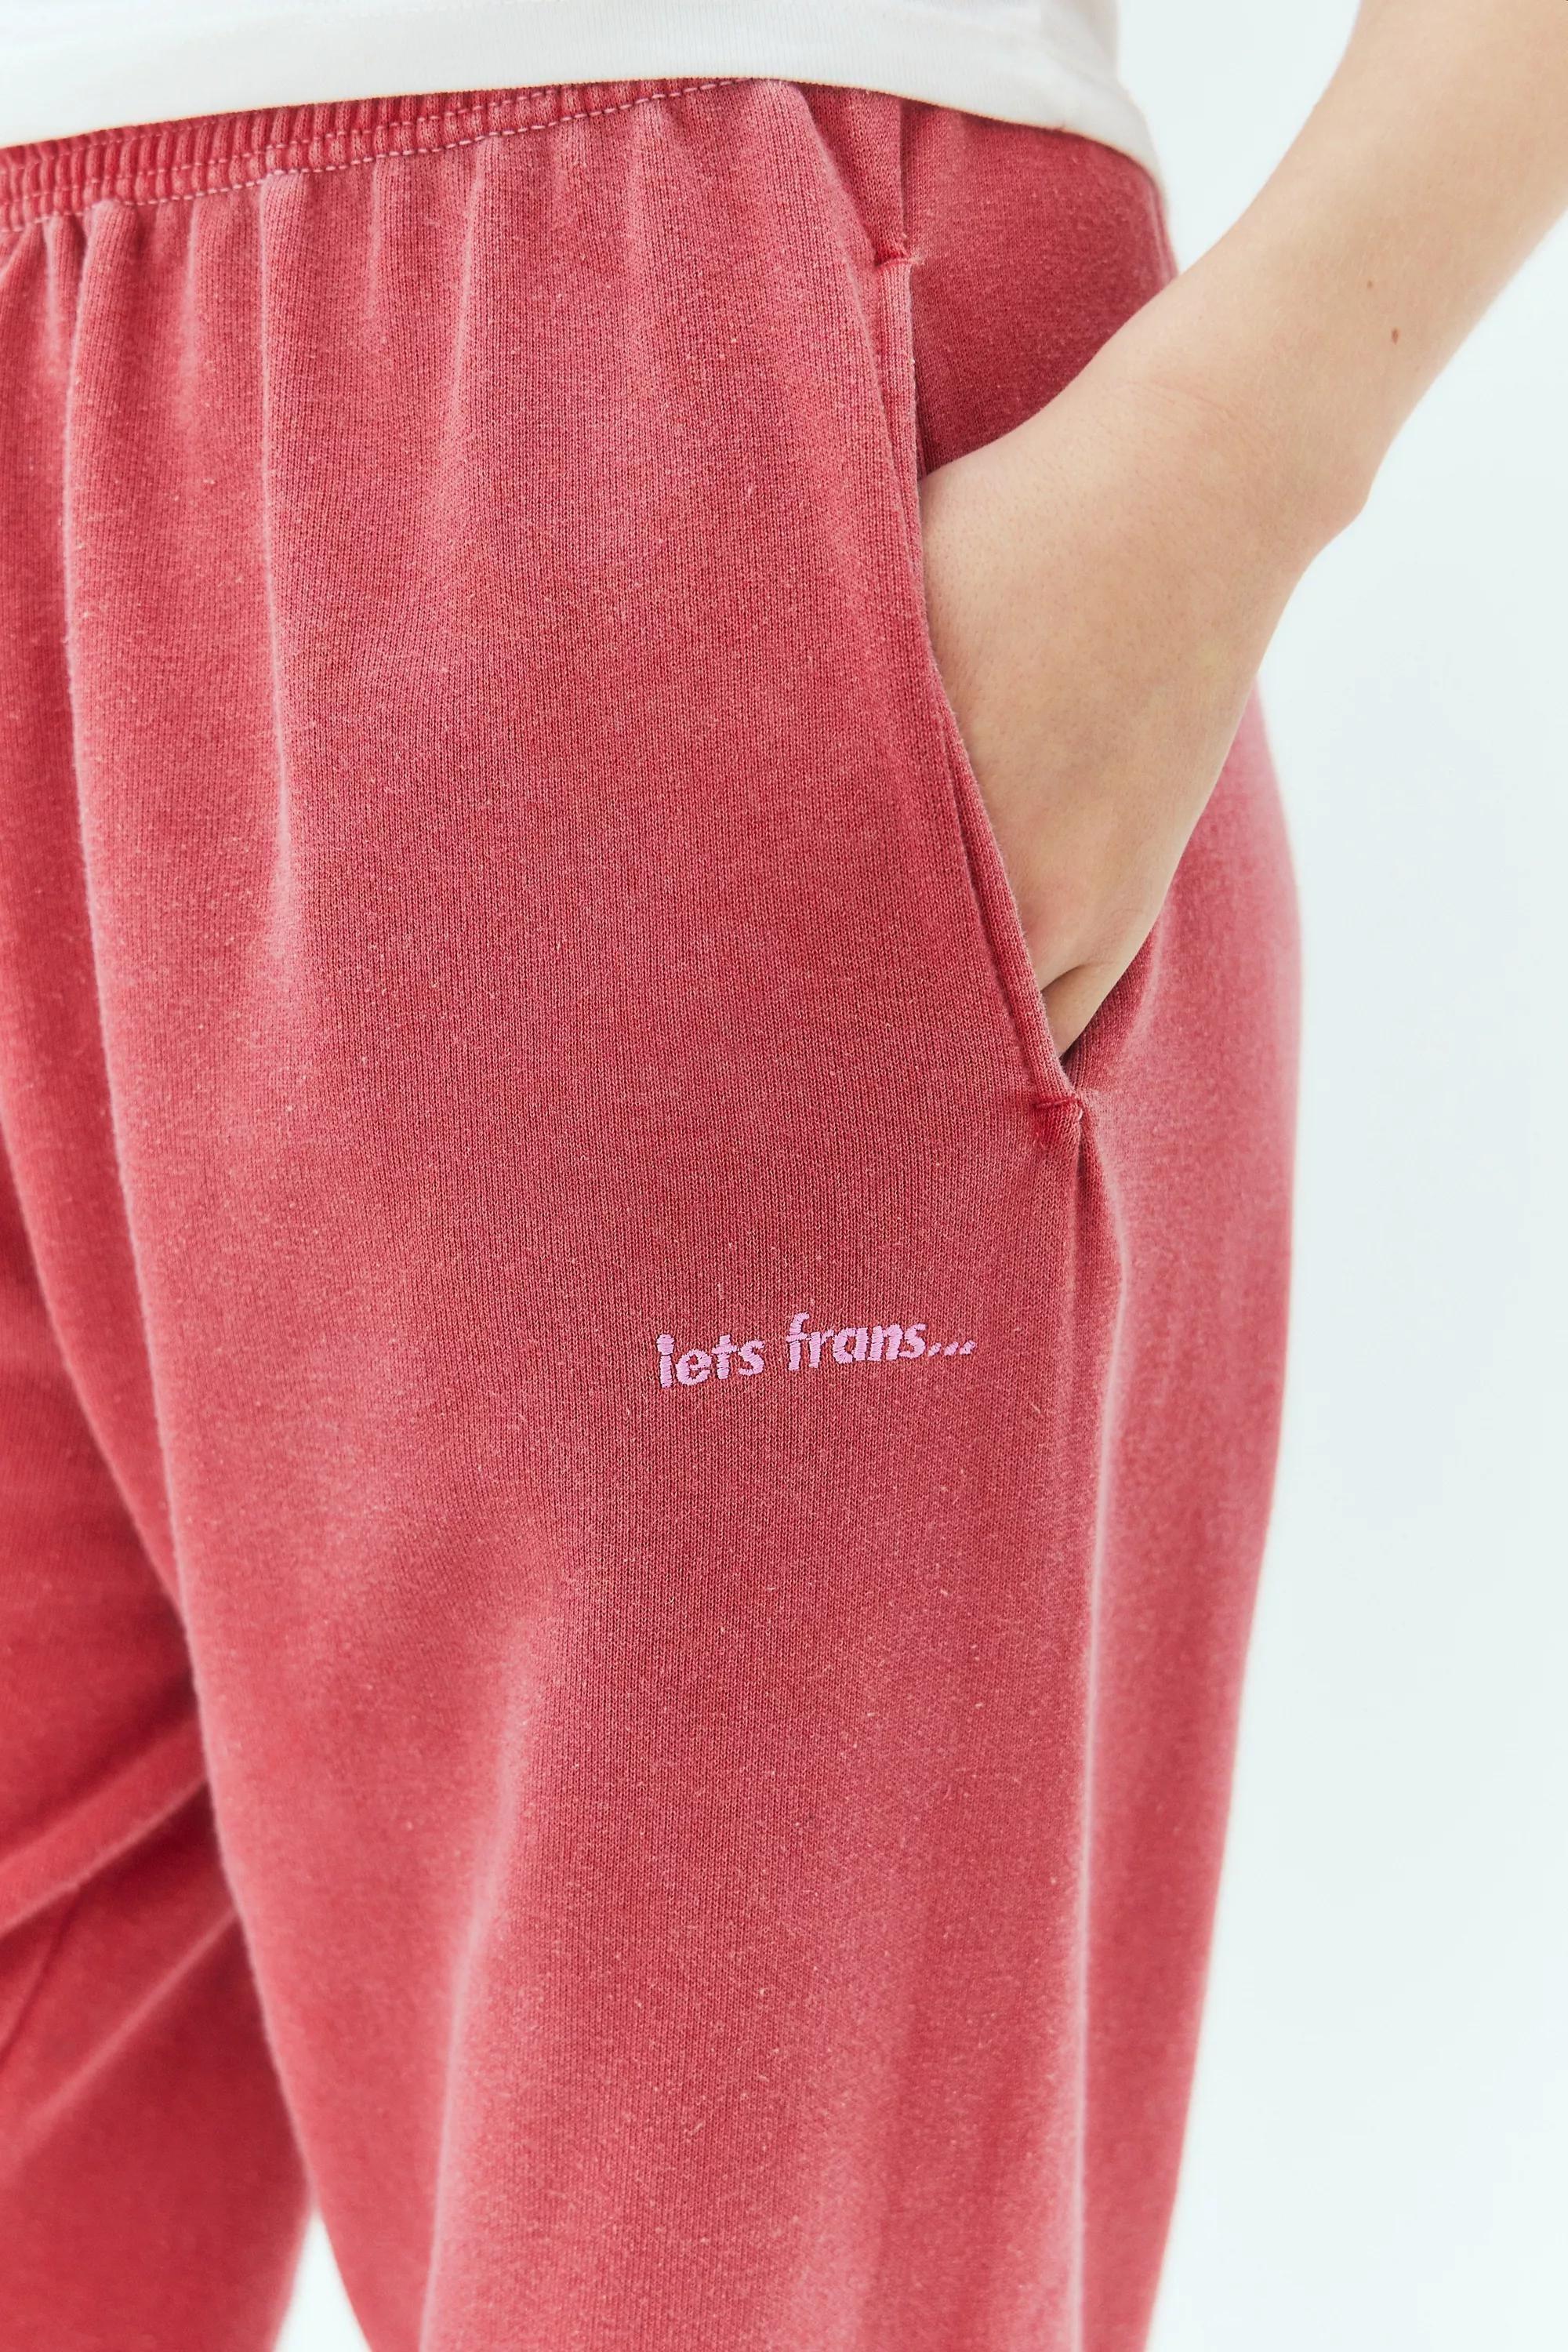 Urban Outfitters - Red Iets Frans... Cuffed Joggers